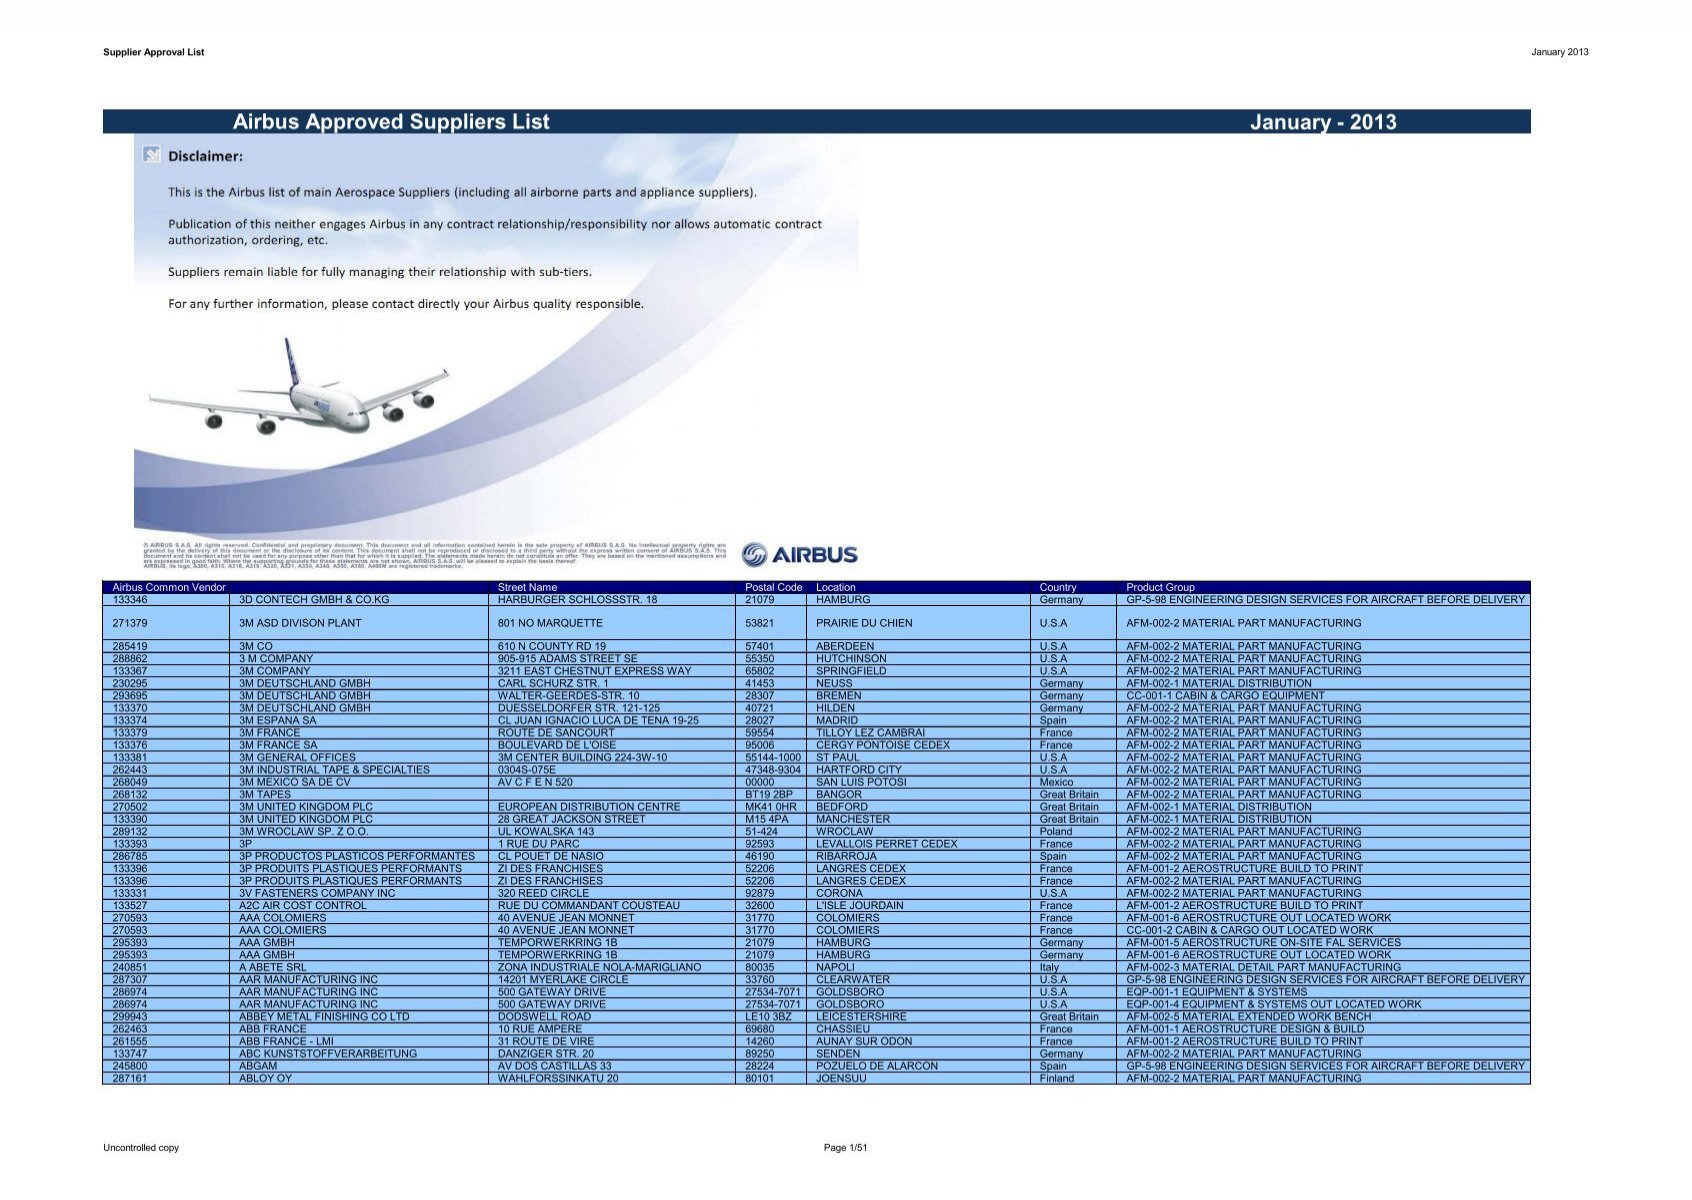 Airbus Approved Suppliers List (as of Januray 2013